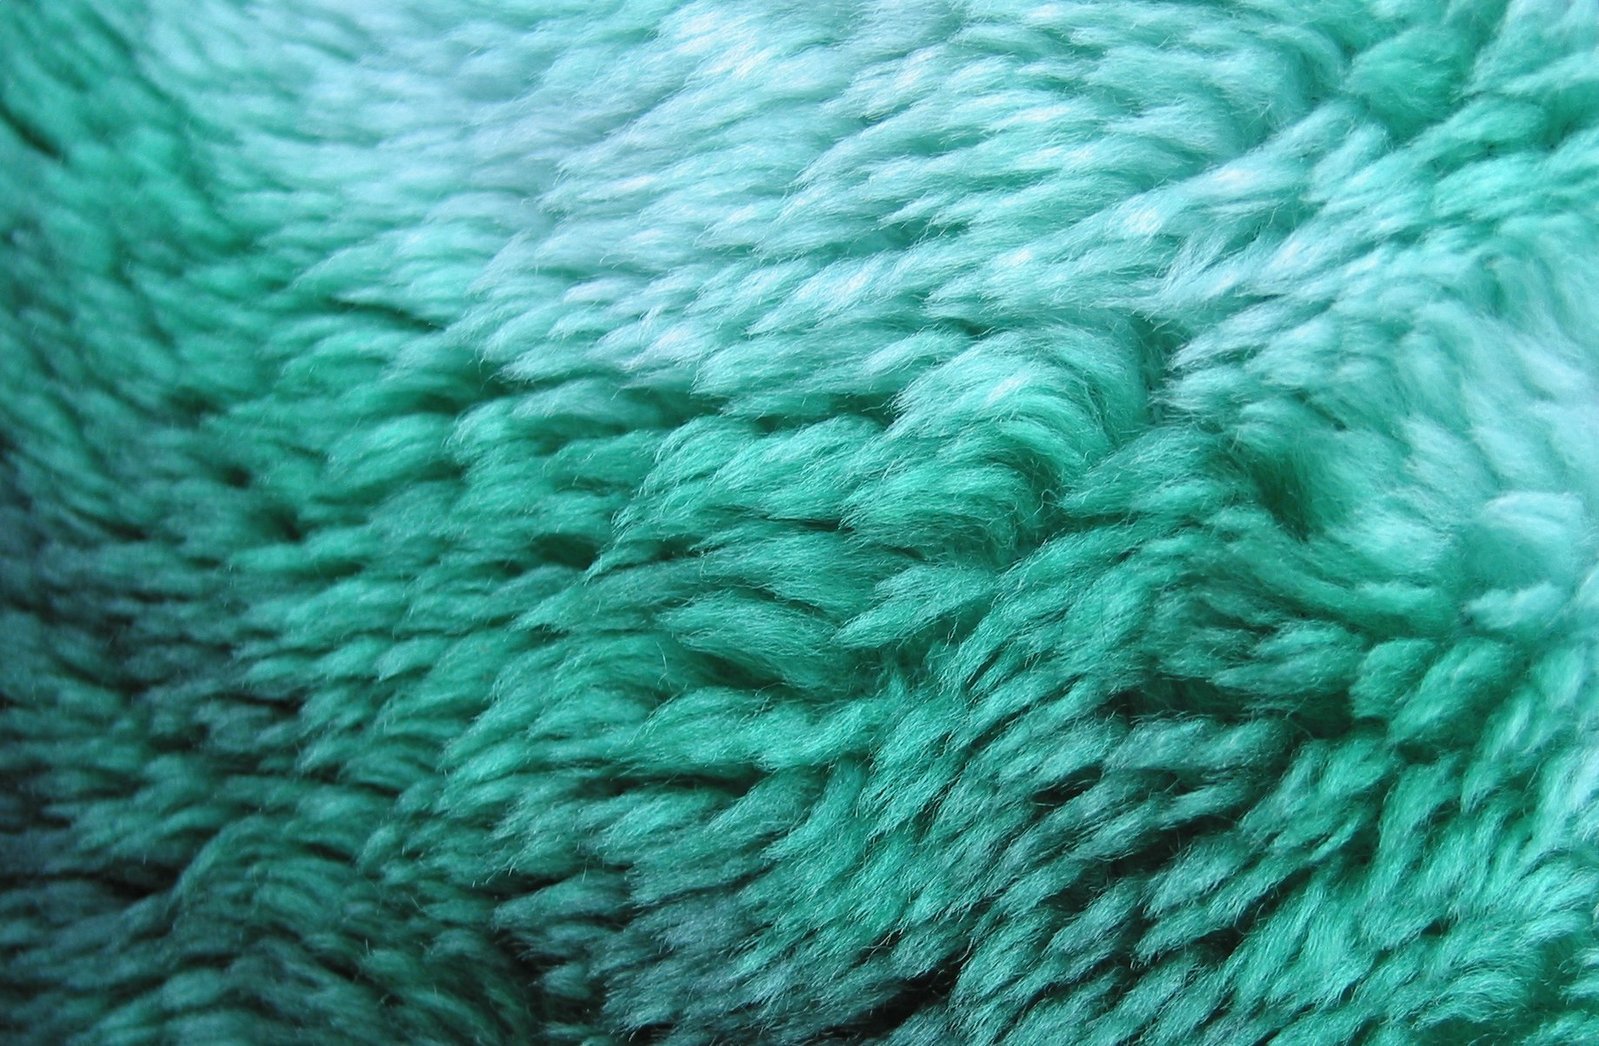 very fuzzy and soft teal green material in full view